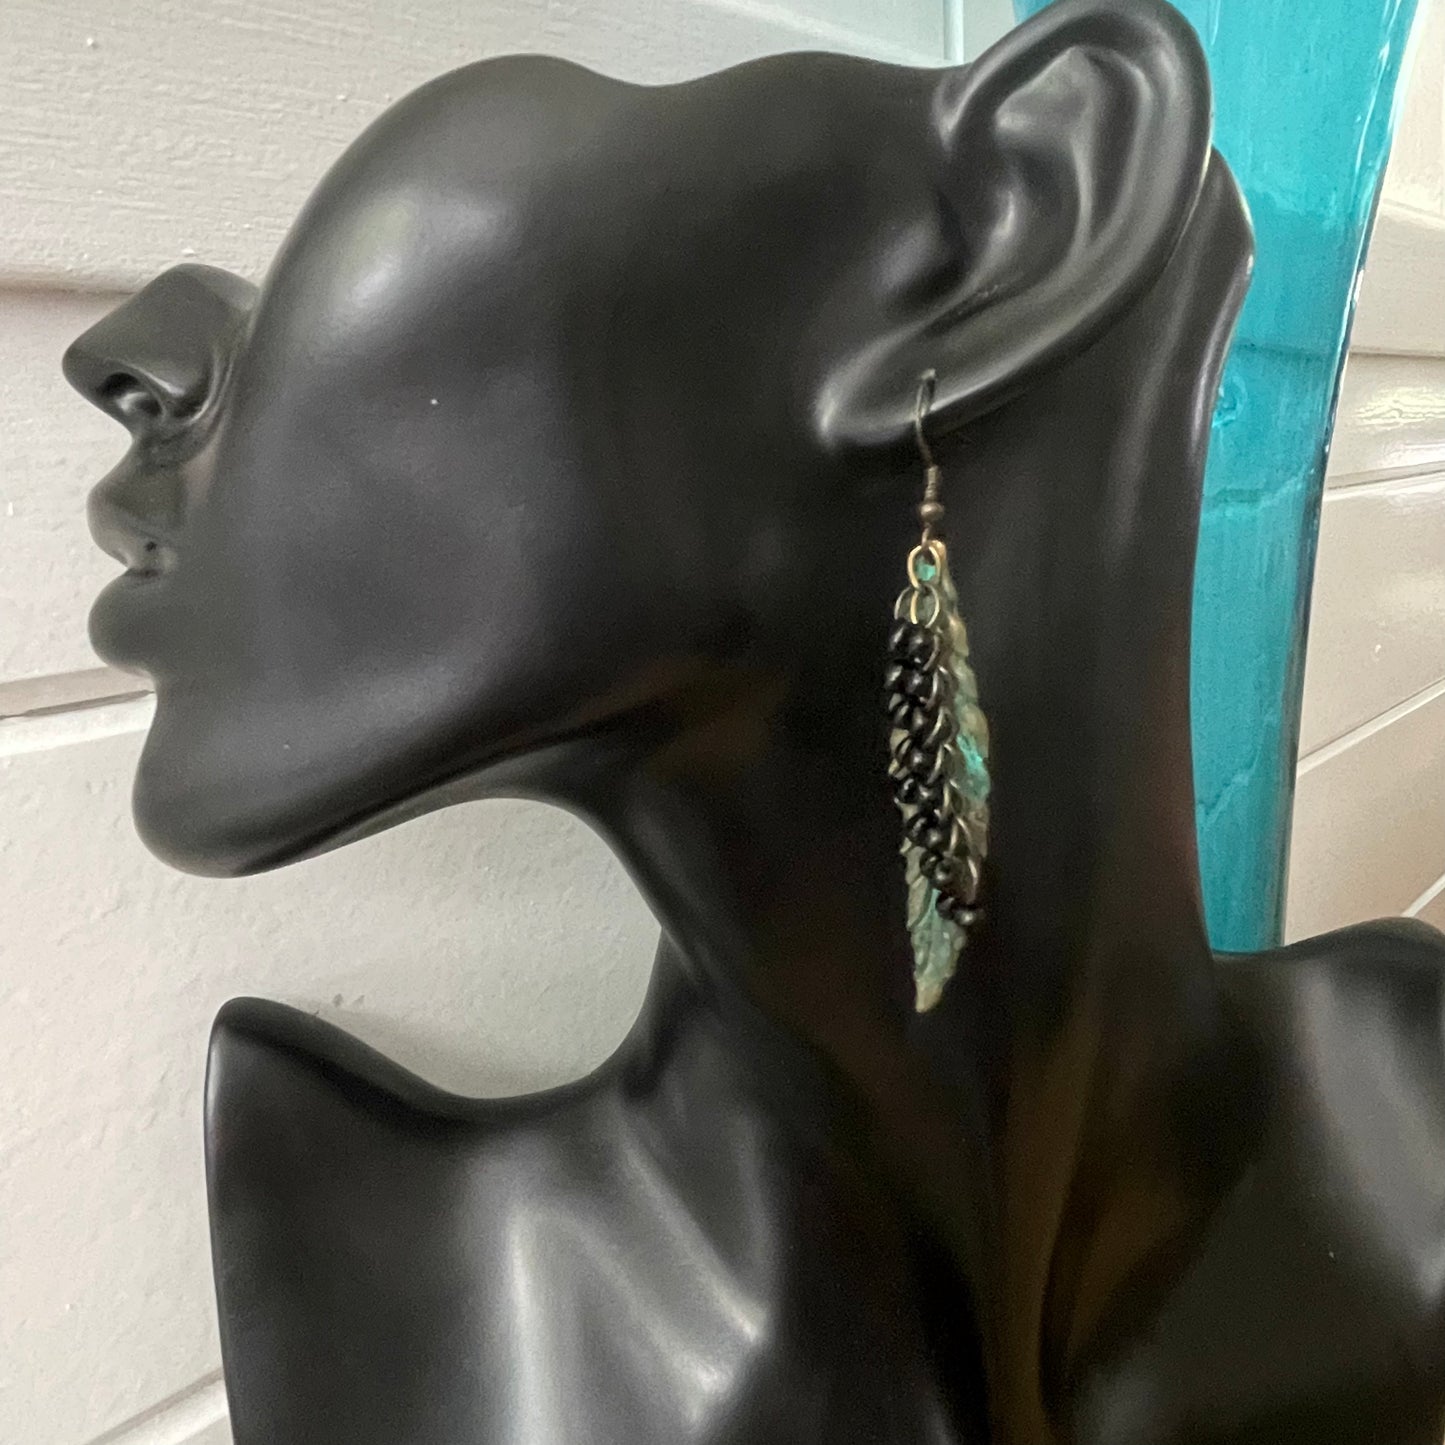 Long Metal Feather & Mini Black Glass Dangling Accent Bead Chain Earrings 2.75" Antiqued Patina Brass Southwestern